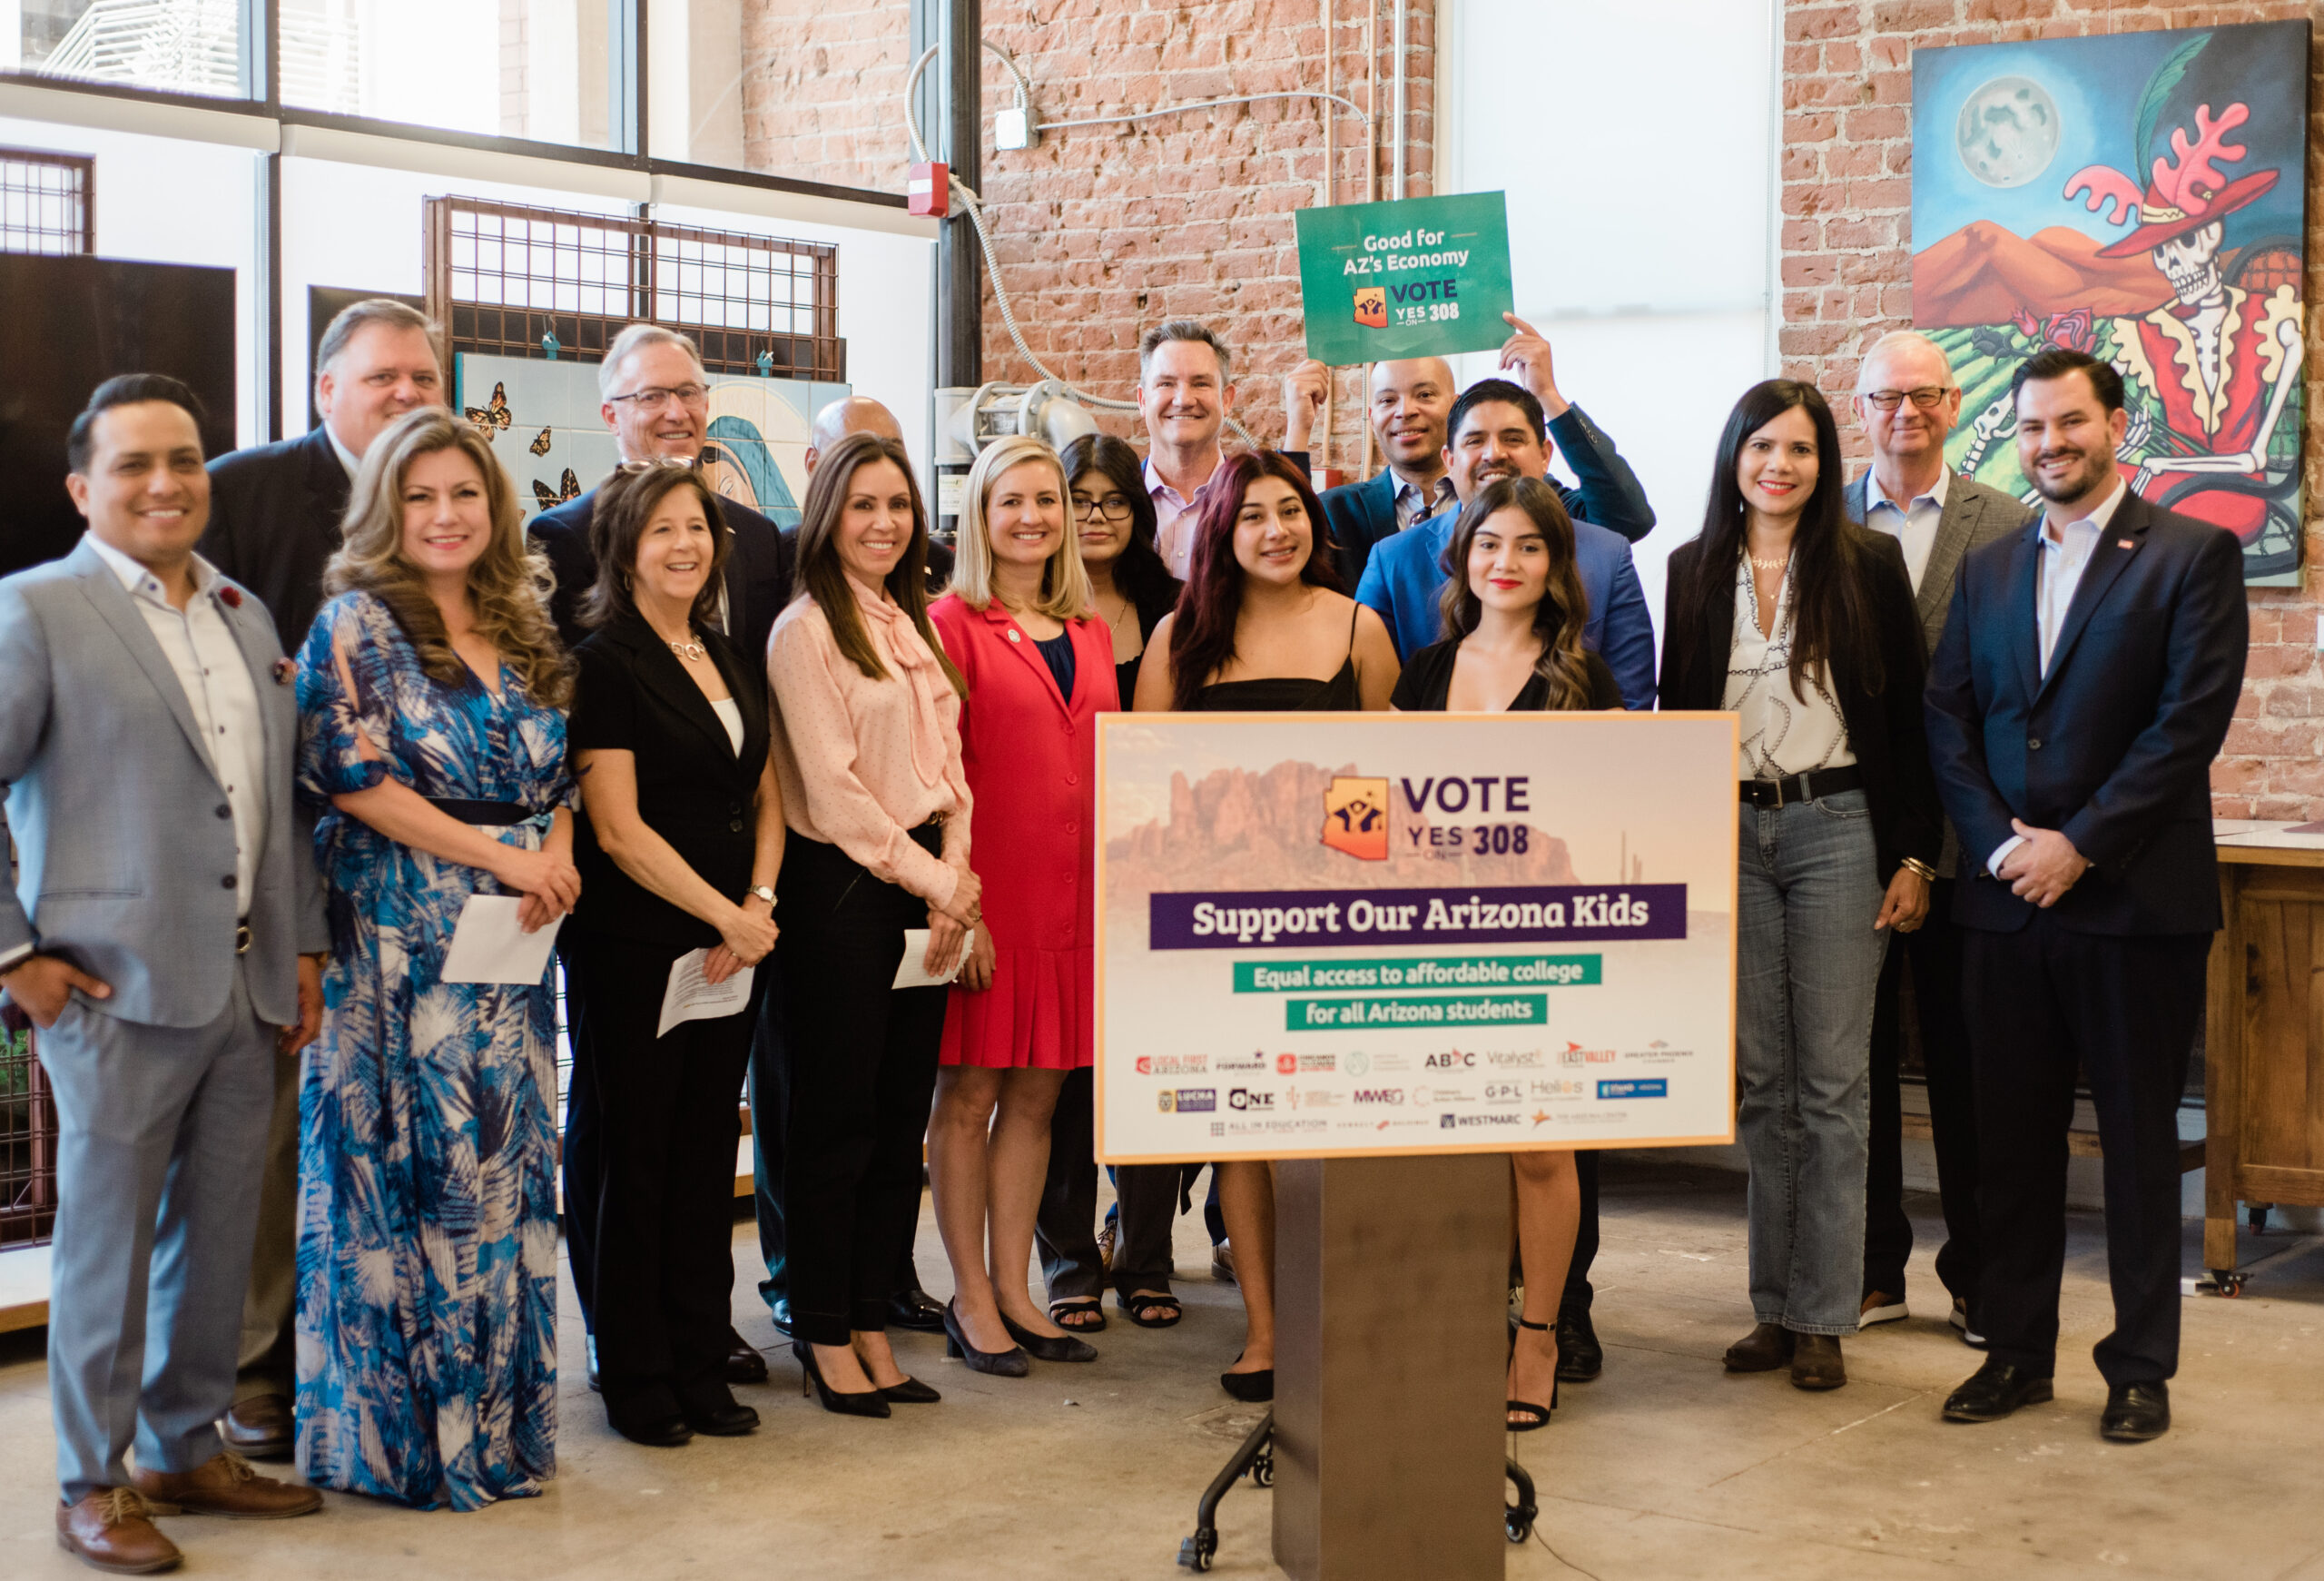 Mayors Gallego and Giles Joined Dreamers, AZ Business Leaders to Urge Voting YES on Prop 308